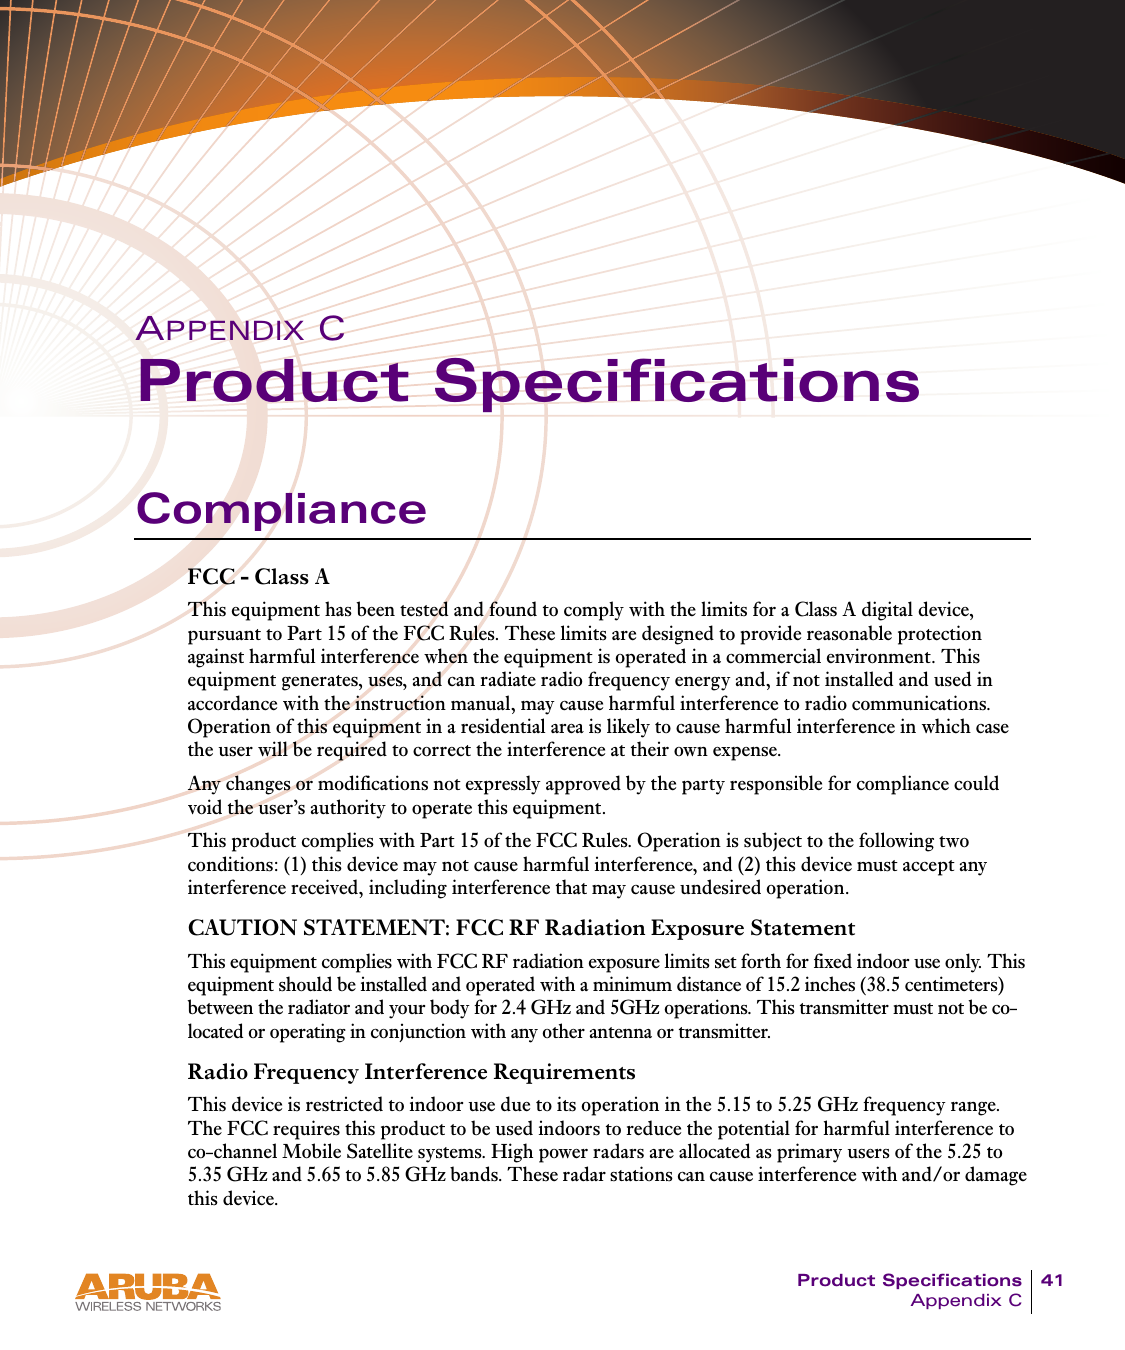 Product Specifications 41Appendix CAPPENDIX CProduct SpecificationsComplianceFCC - Class AThis equipment has been tested and found to comply with the limits for a Class A digital device, pursuant to Part 15 of the FCC Rules. These limits are designed to provide reasonable protection against harmful interference when the equipment is operated in a commercial environment. This equipment generates, uses, and can radiate radio frequency energy and, if not installed and used in accordance with the instruction manual, may cause harmful interference to radio communications. Operation of this equipment in a residential area is likely to cause harmful interference in which case the user will be required to correct the interference at their own expense.Any changes or modifications not expressly approved by the party responsible for compliance could void the user’s authority to operate this equipment.This product complies with Part 15 of the FCC Rules. Operation is subject to the following two conditions: (1) this device may not cause harmful interference, and (2) this device must accept any interference received, including interference that may cause undesired operation.CAUTION STATEMENT: FCC RF Radiation Exposure StatementThis equipment complies with FCC RF radiation exposure limits set forth for fixed indoor use only. This equipment should be installed and operated with a minimum distance of 15.2 inches (38.5 centimeters) between the radiator and your body for 2.4 GHz and 5GHz operations. This transmitter must not be co-located or operating in conjunction with any other antenna or transmitter.Radio Frequency Interference RequirementsThis device is restricted to indoor use due to its operation in the 5.15 to 5.25 GHz frequency range. The FCC requires this product to be used indoors to reduce the potential for harmful interference to co-channel Mobile Satellite systems. High power radars are allocated as primary users of the 5.25 to 5.35 GHz and 5.65 to 5.85 GHz bands. These radar stations can cause interference with and/or damage this device.